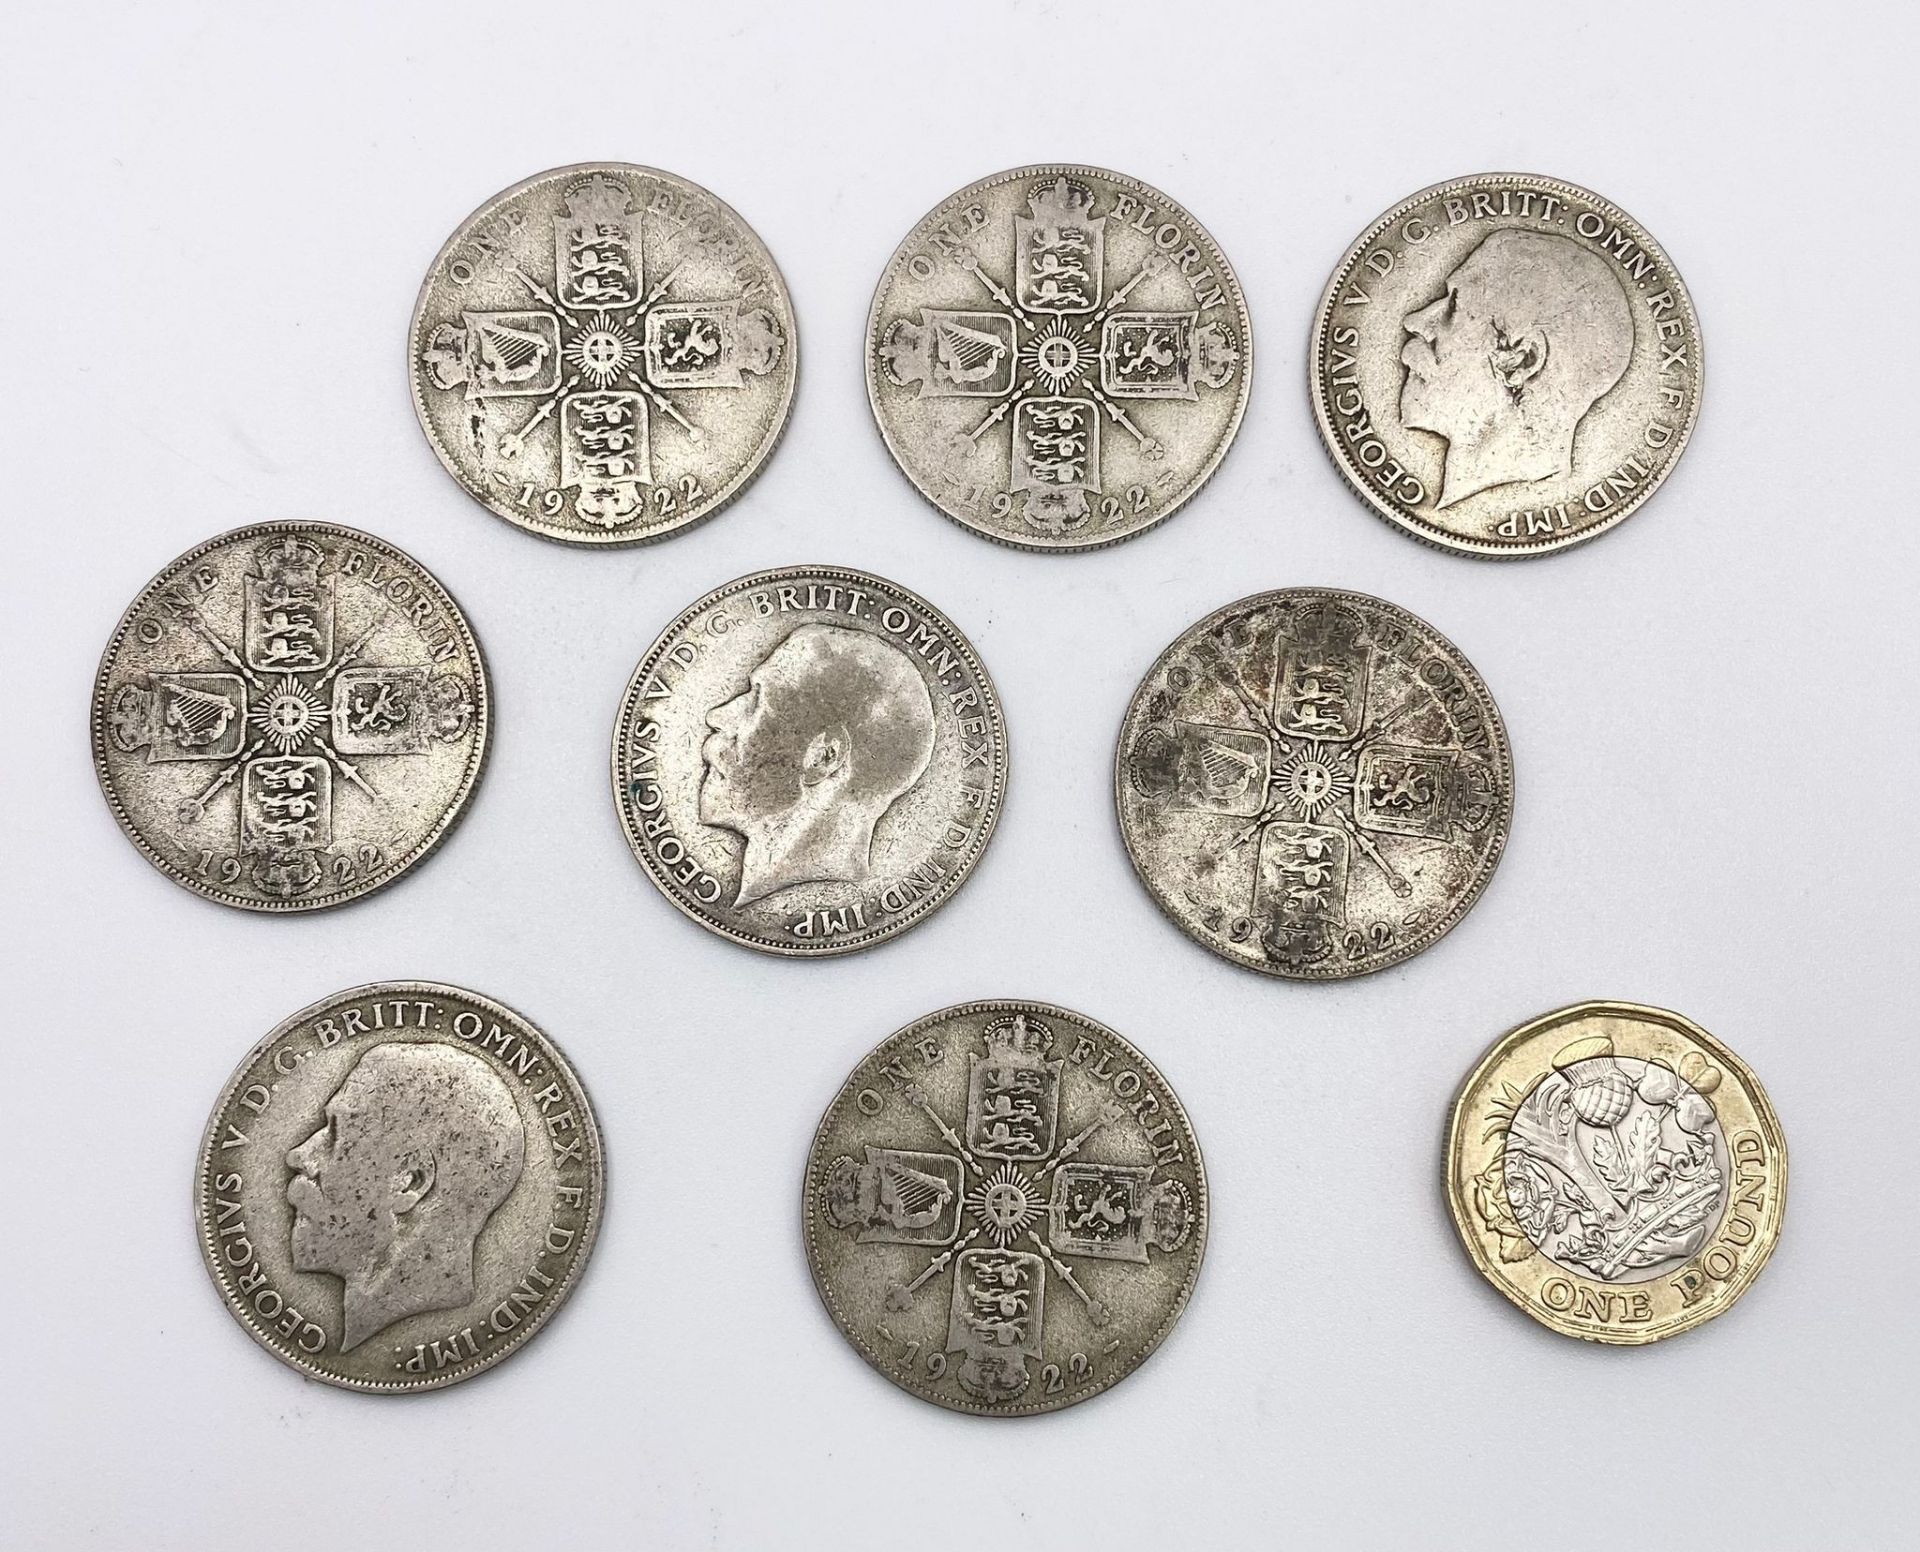 A Set of 8 British Florin Coins, All Dated 1922, Fair to Good Condition. Total Weight 88 grams - Image 3 of 3